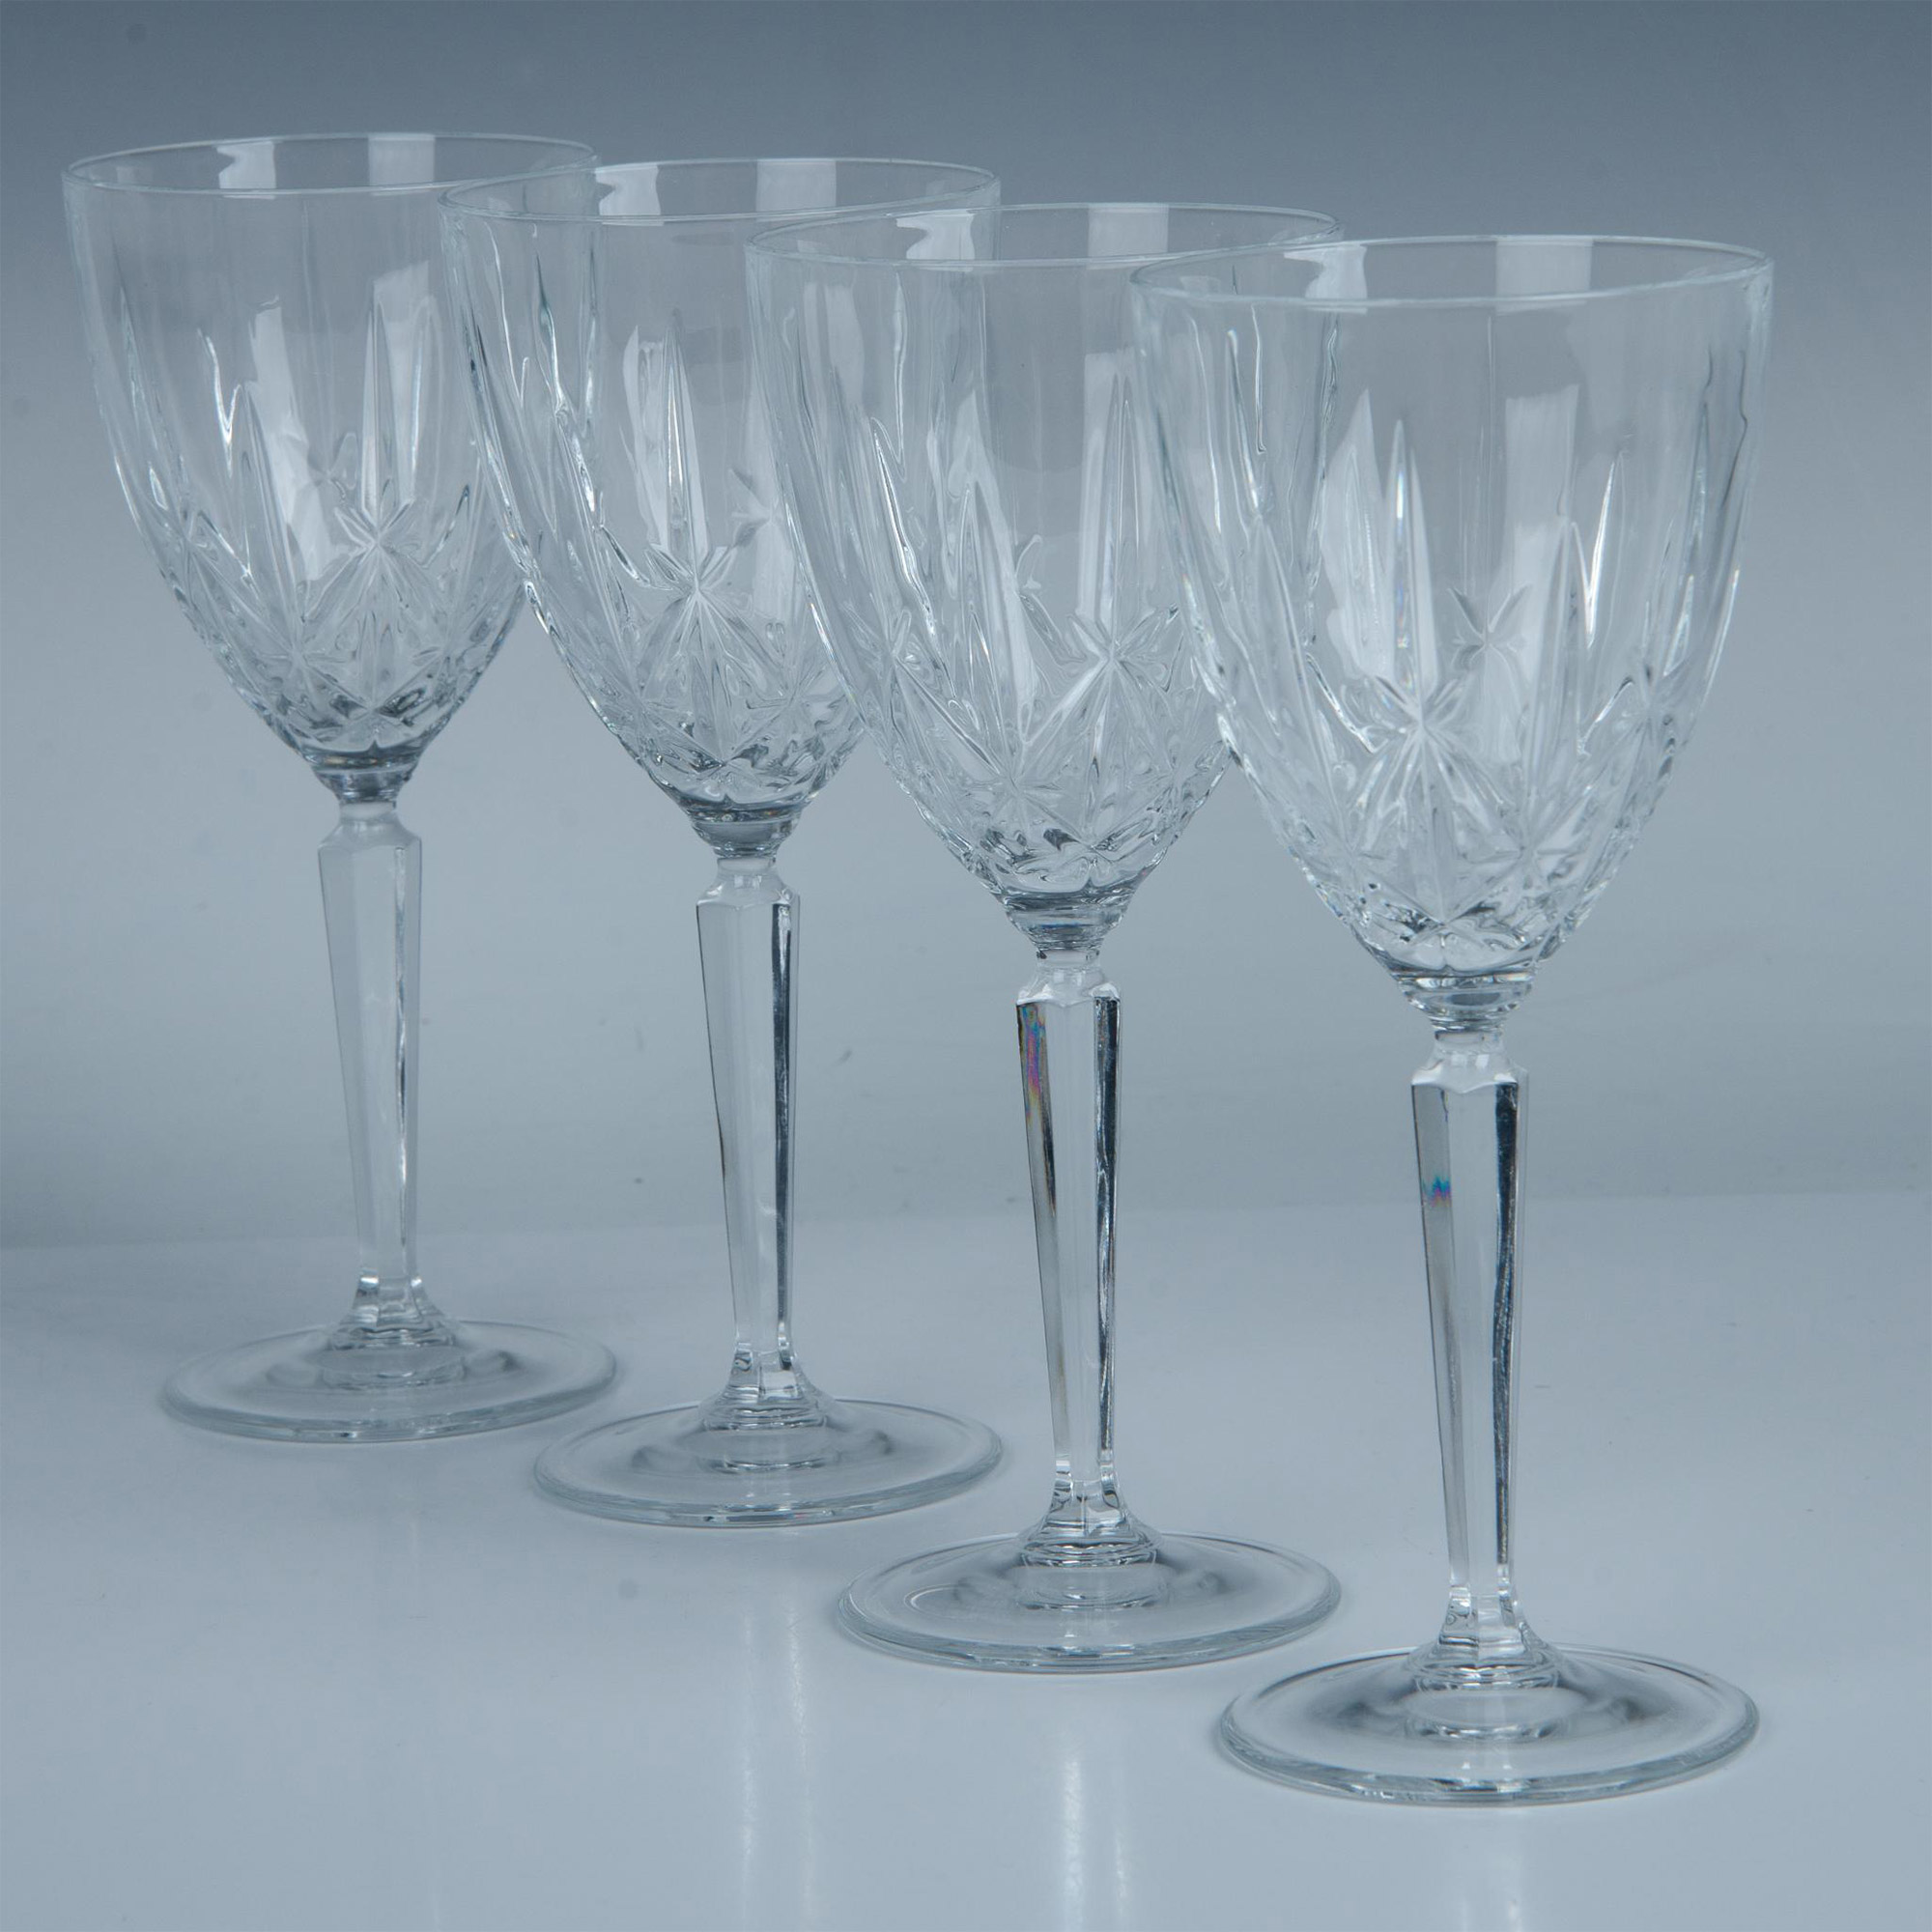 4pc Marquis by Waterford Set of Oversized Goblets, Sparkle - Image 4 of 7